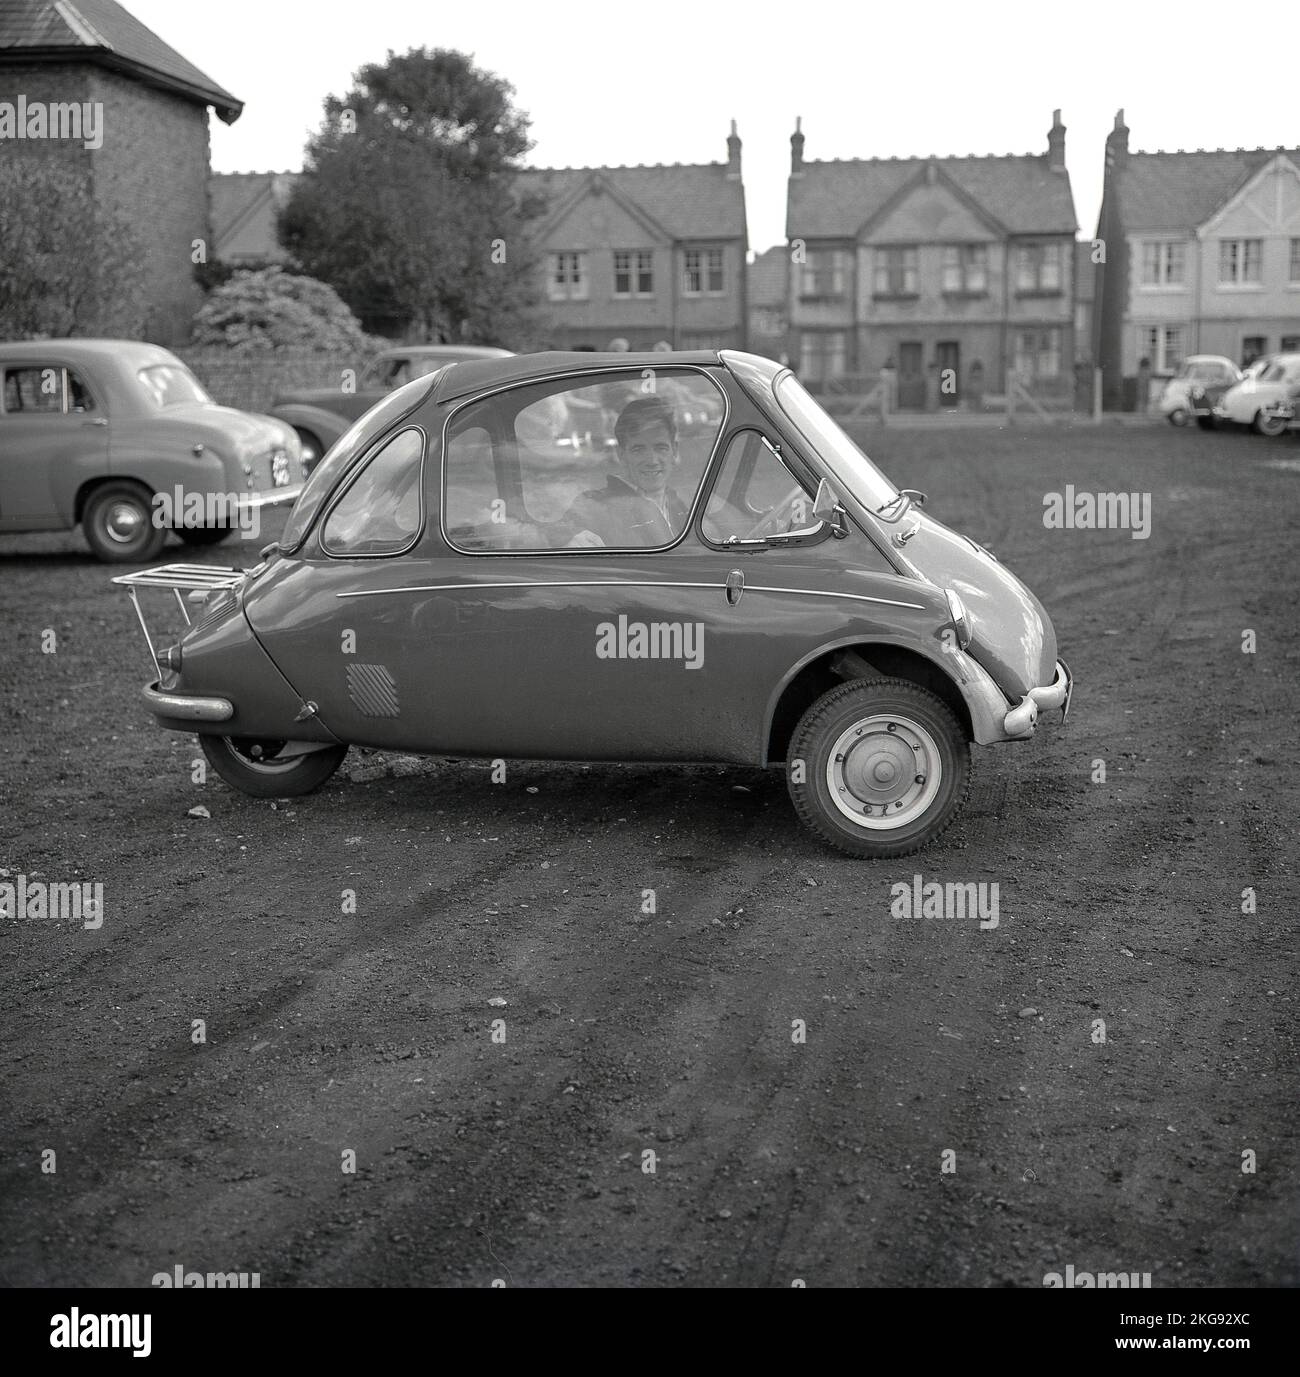 1960s, historical, outside in a gravel car park, a man sitting inside a small car of the era, a bubble car, a BMW Isetta, which had a front-opening door, Wycombe, England, UK. First built by Iso SpA in Italy in 1953, this tiny car was built under licence in different countries, including by BMW of Germany until 1962 and famously known as the 'Bubble Car'. Stock Photo